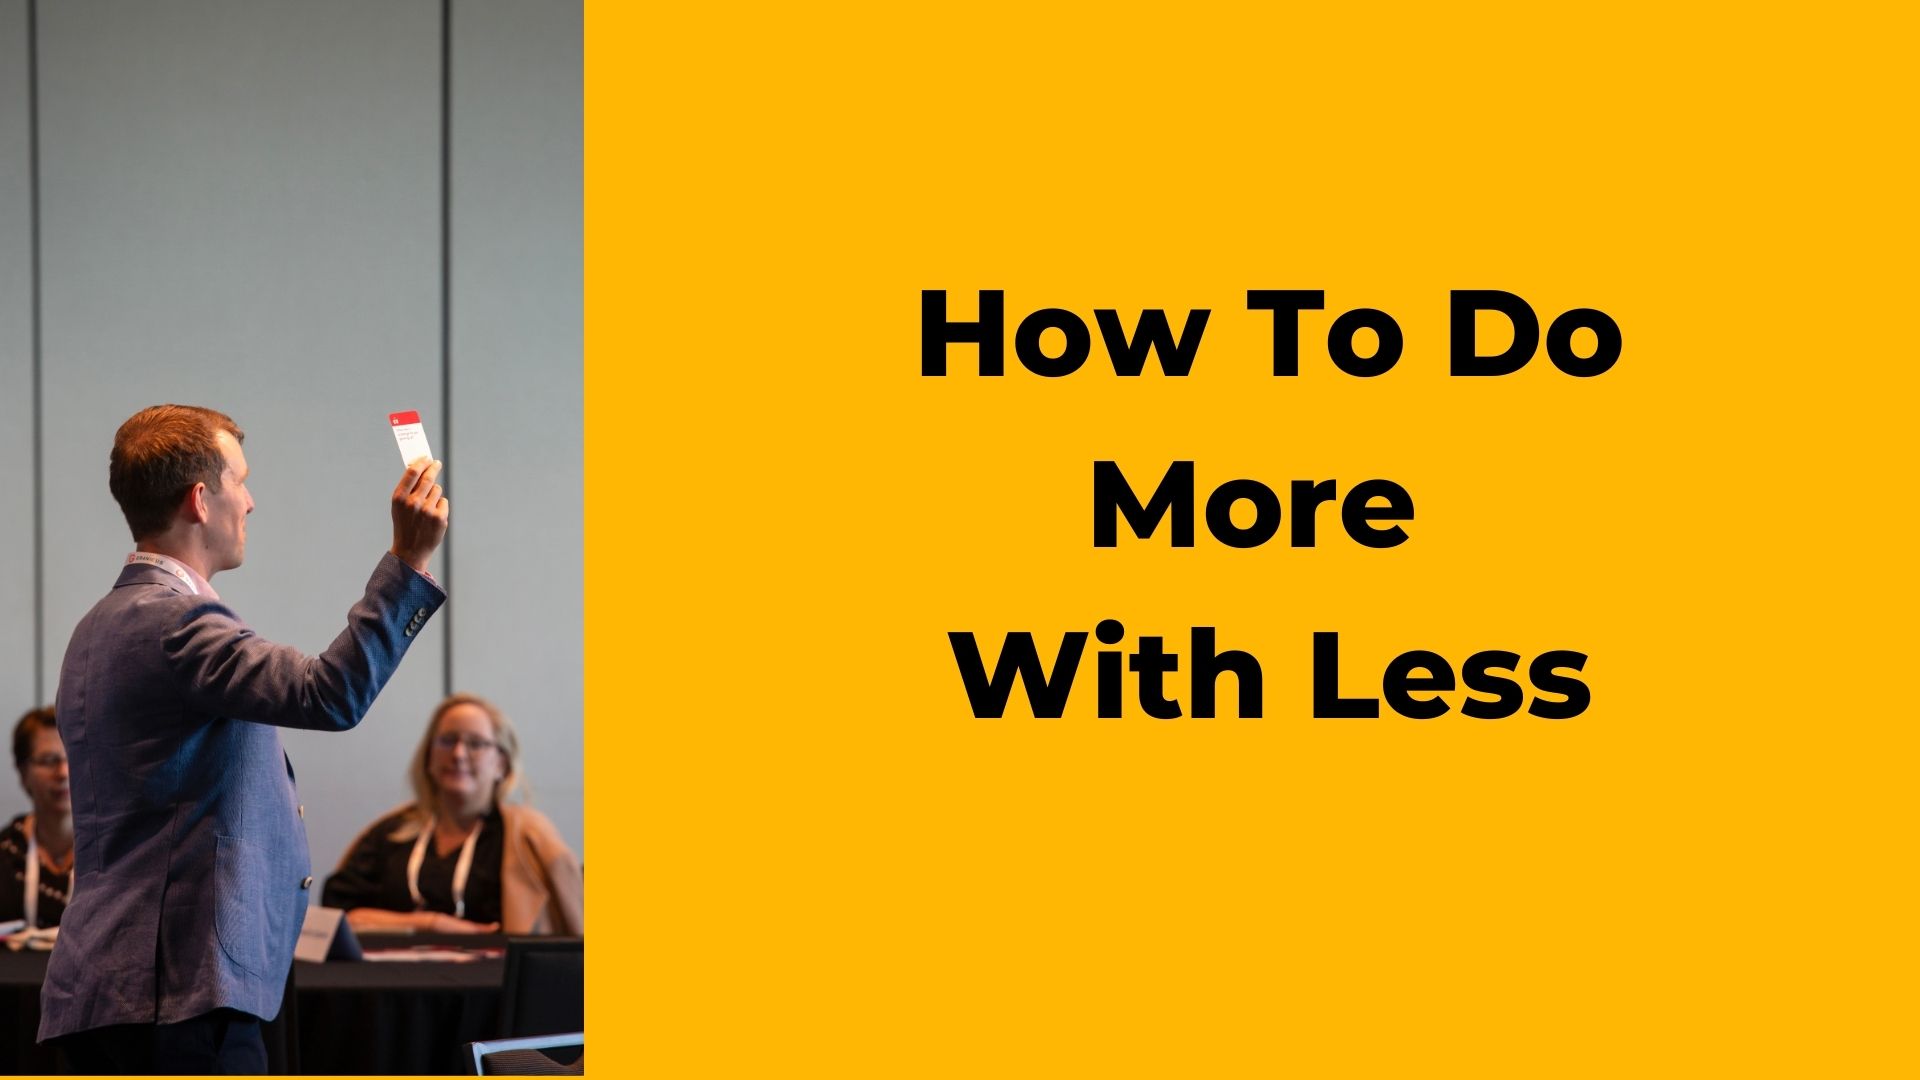 How to do more with less